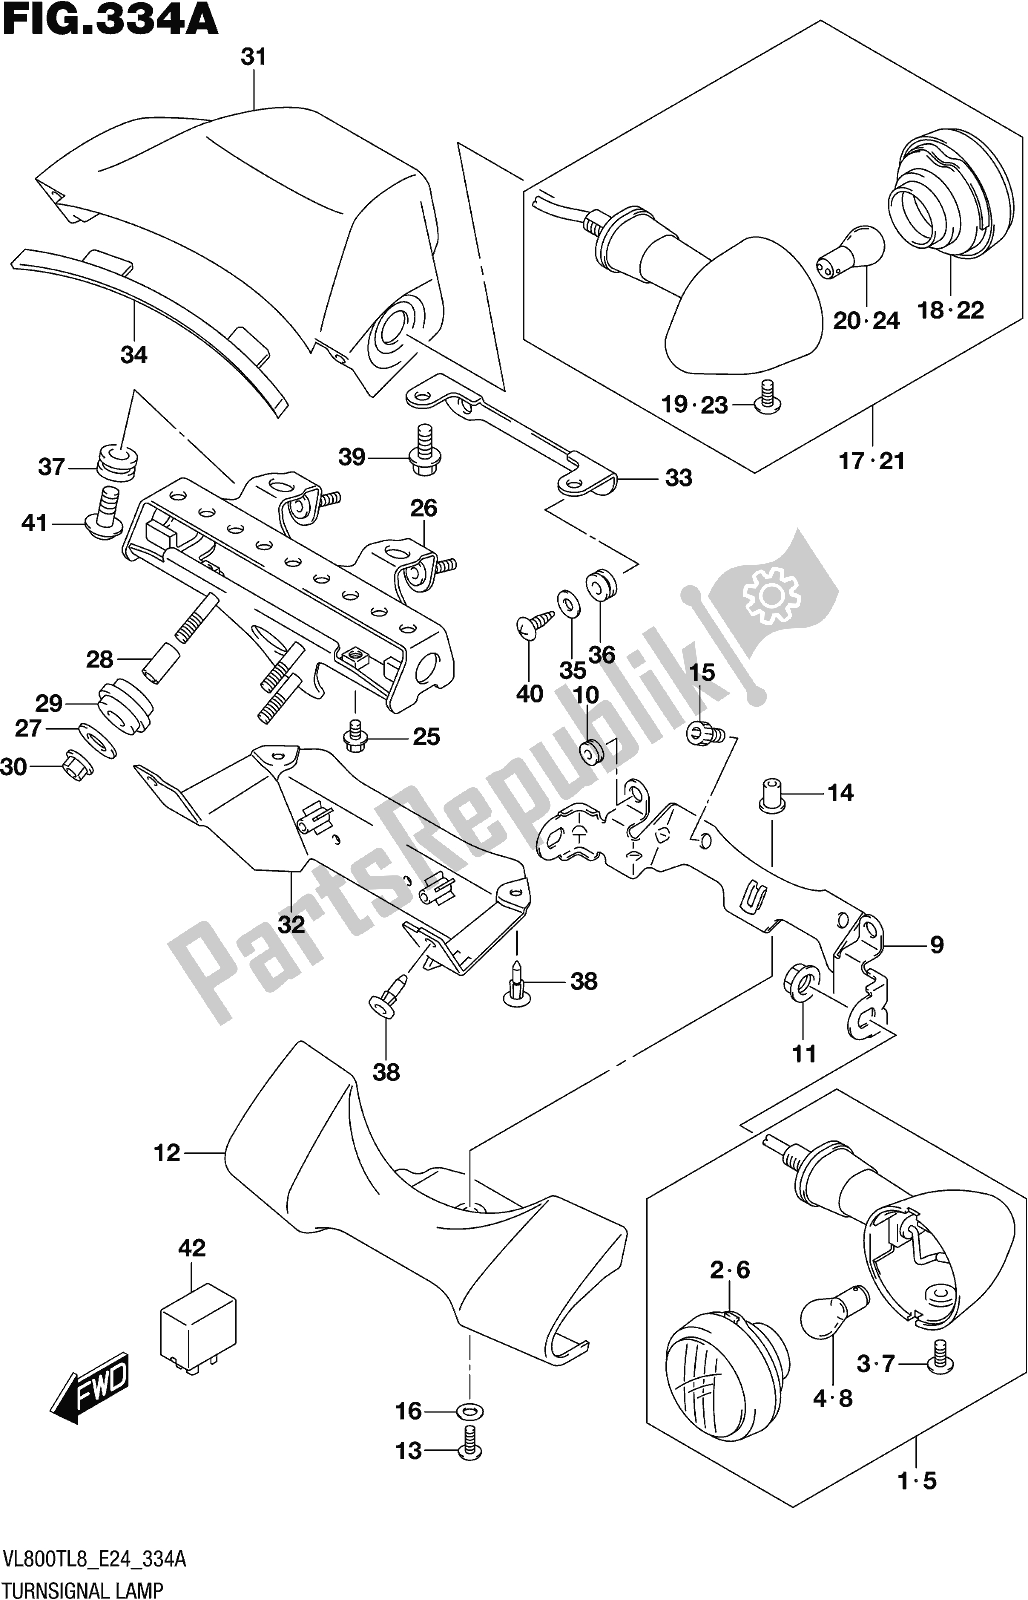 All parts for the Fig. 334a Turnsignal Lamp of the Suzuki VL 800T 2018